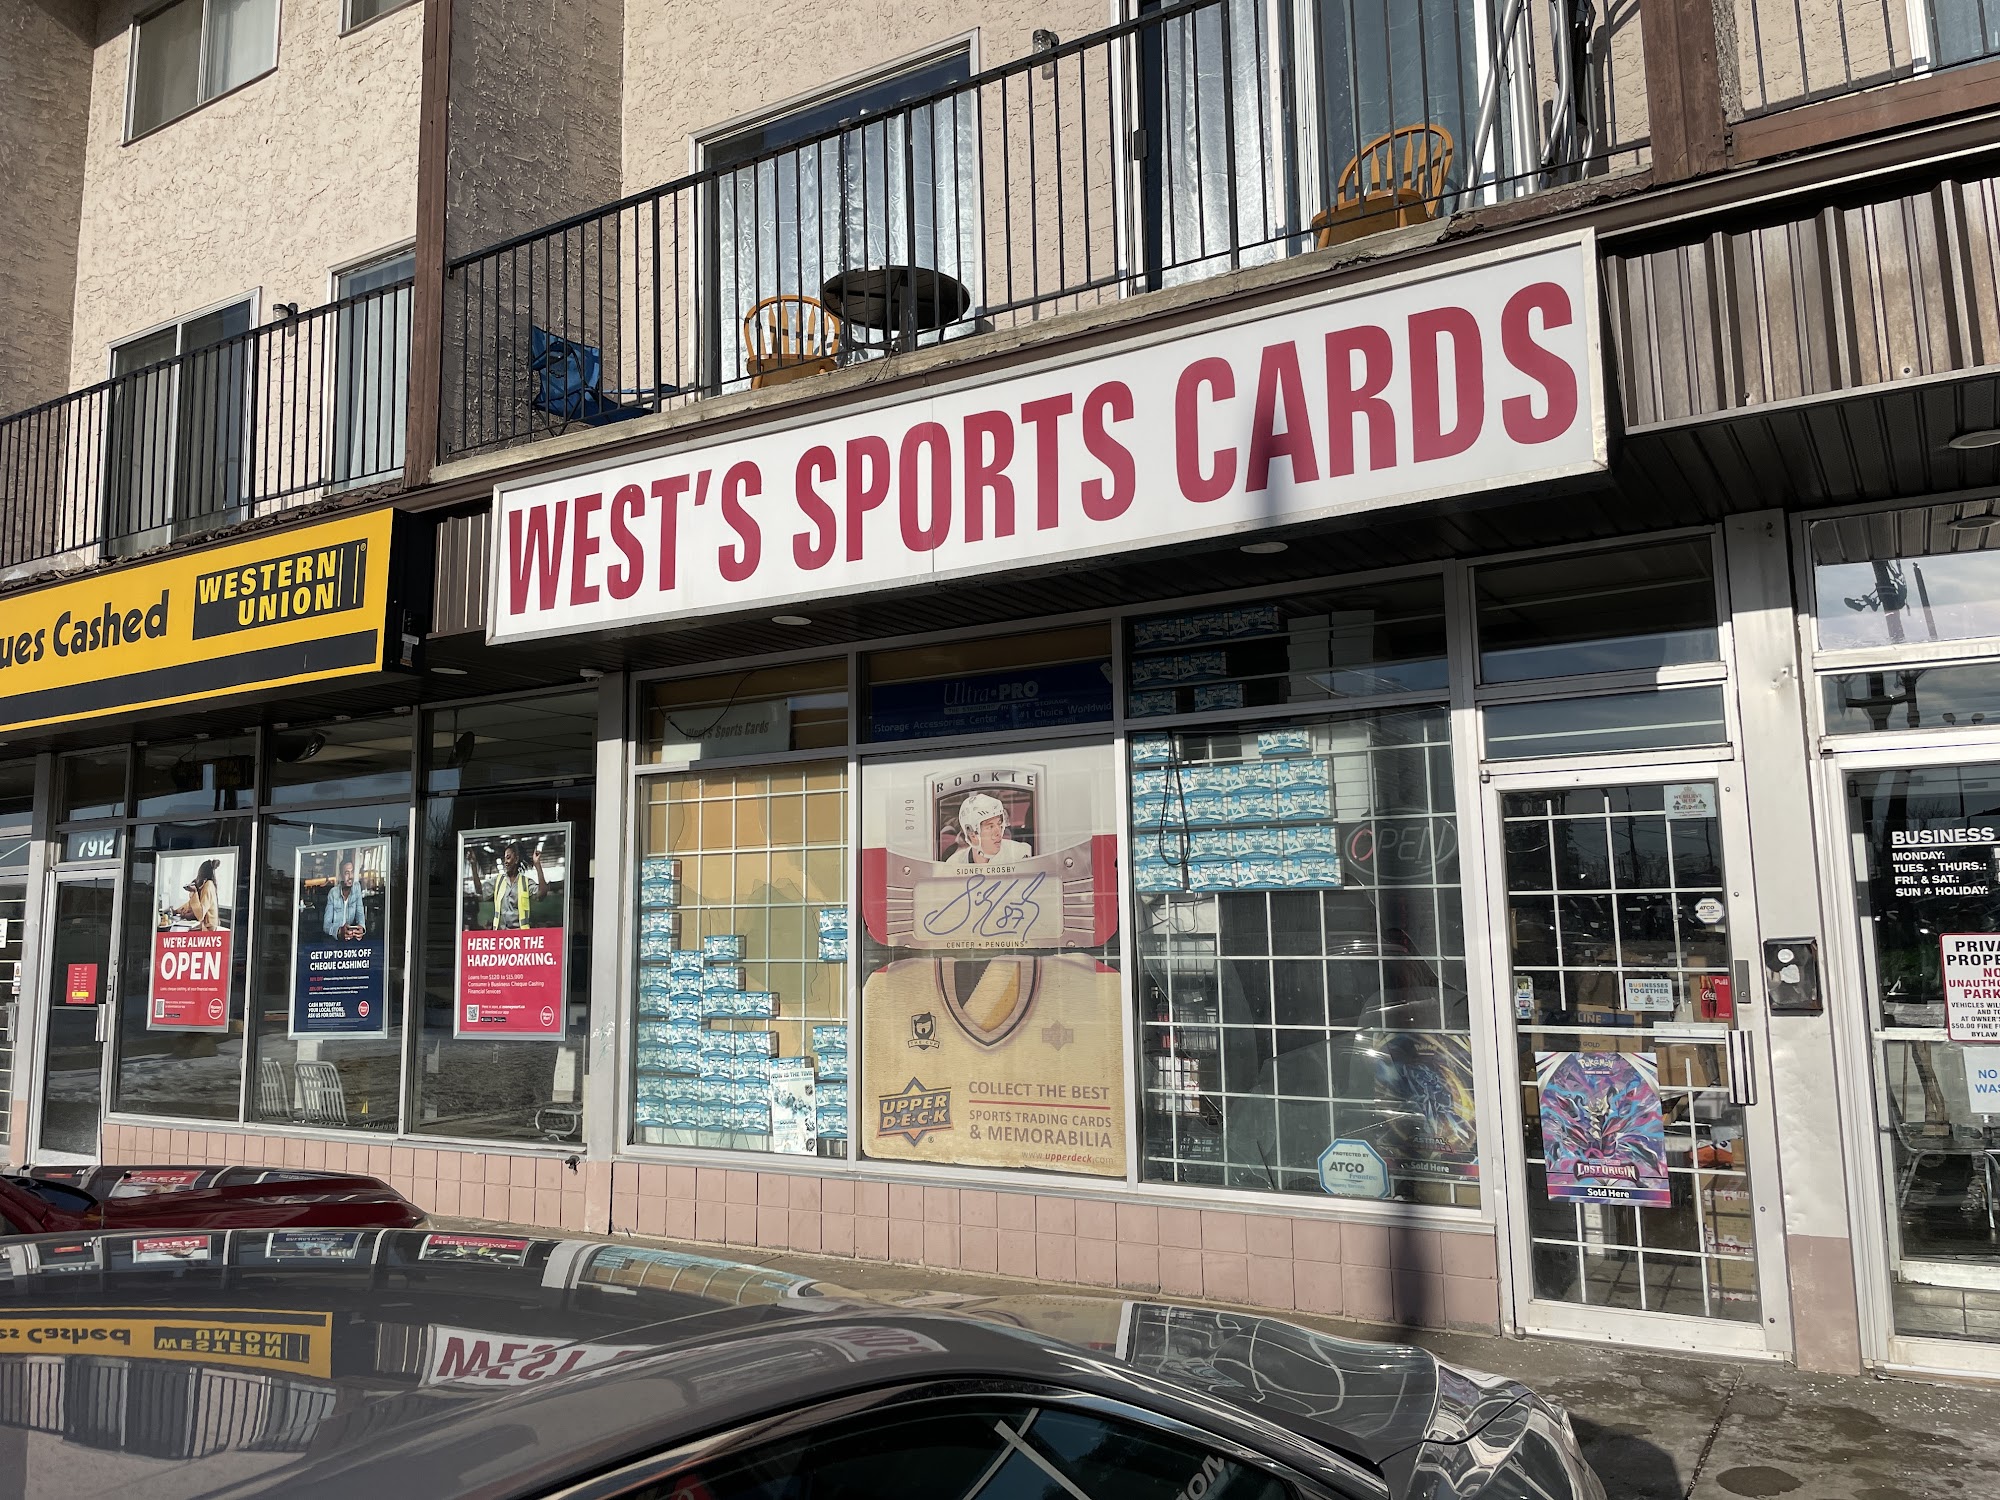 West's Sports Cards